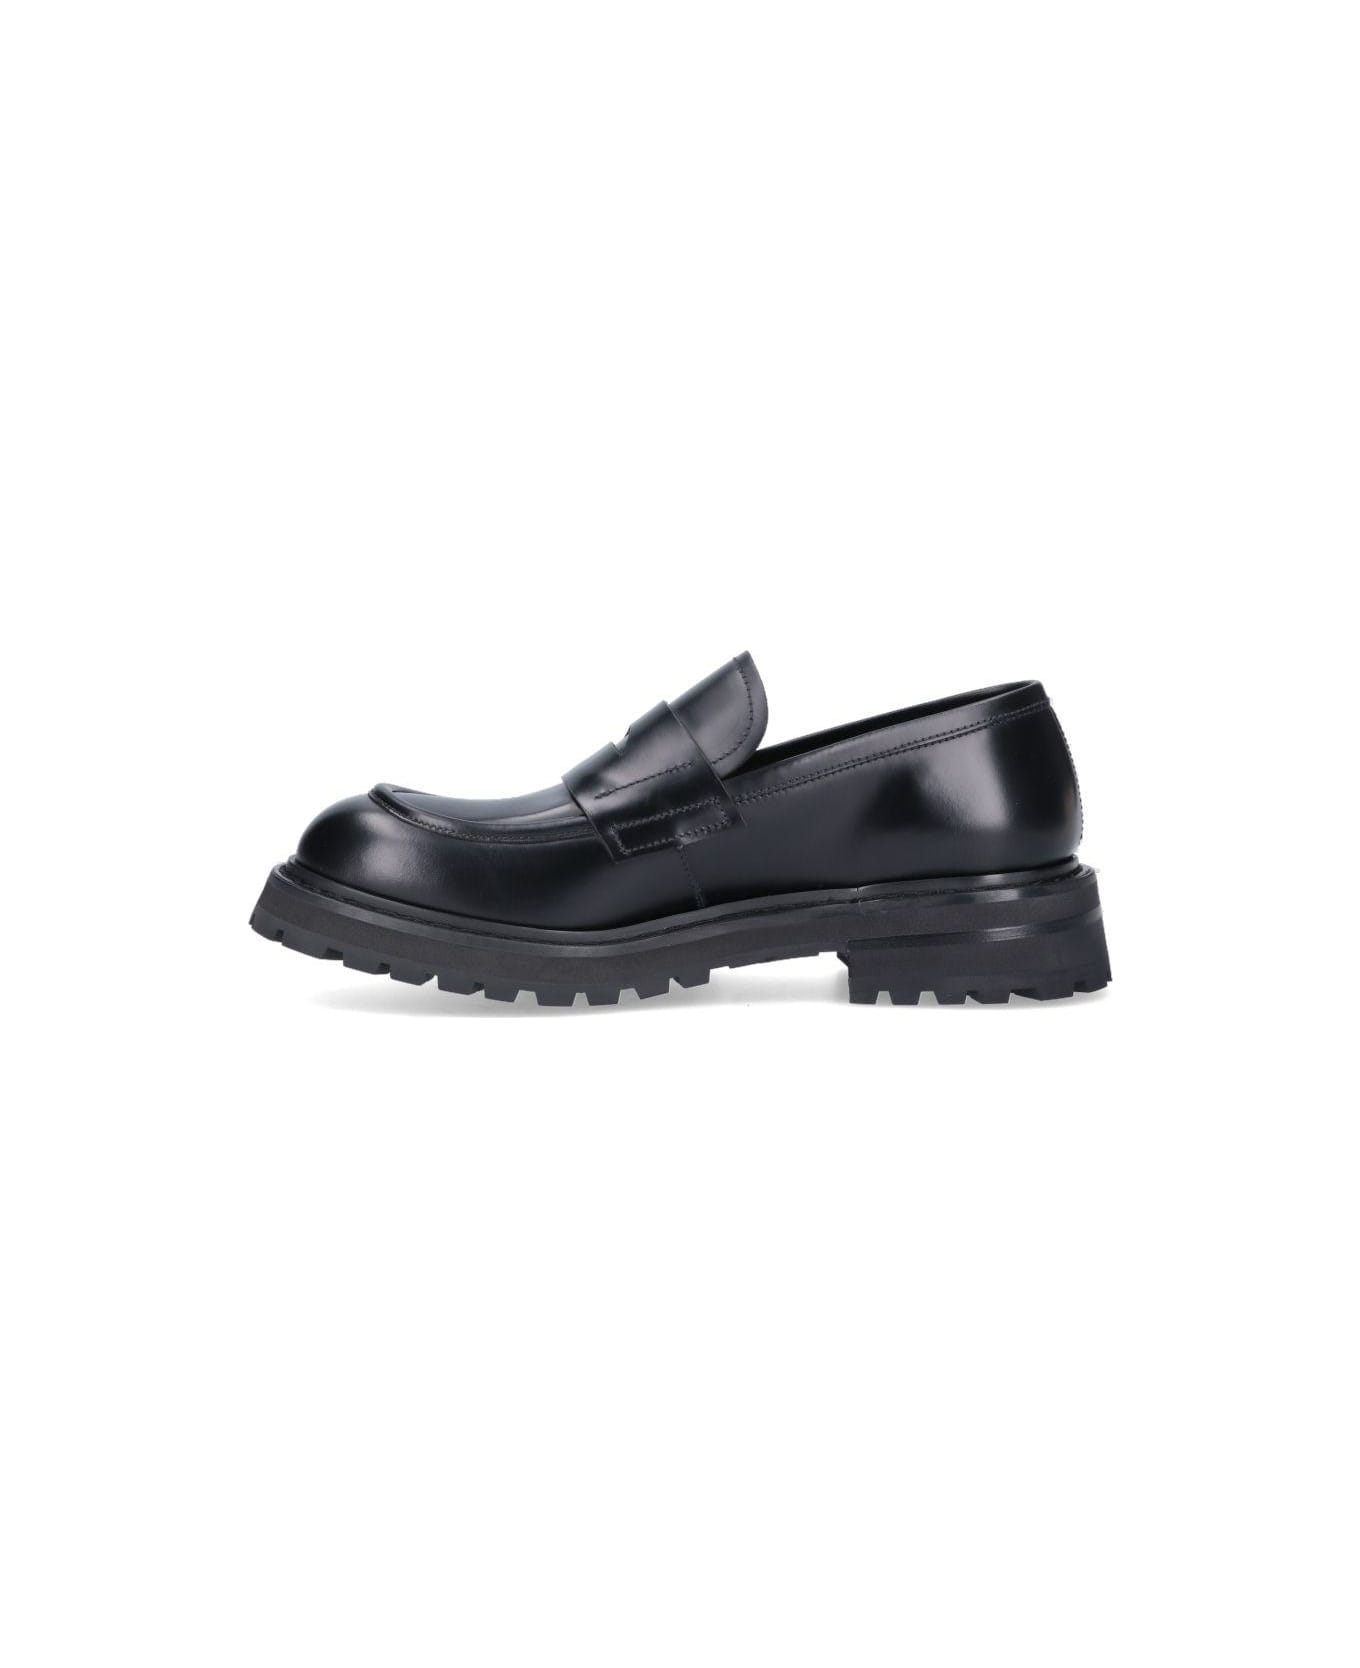 Premiata Leather Loafers Loafers - NERO ローファー＆デッキシューズ